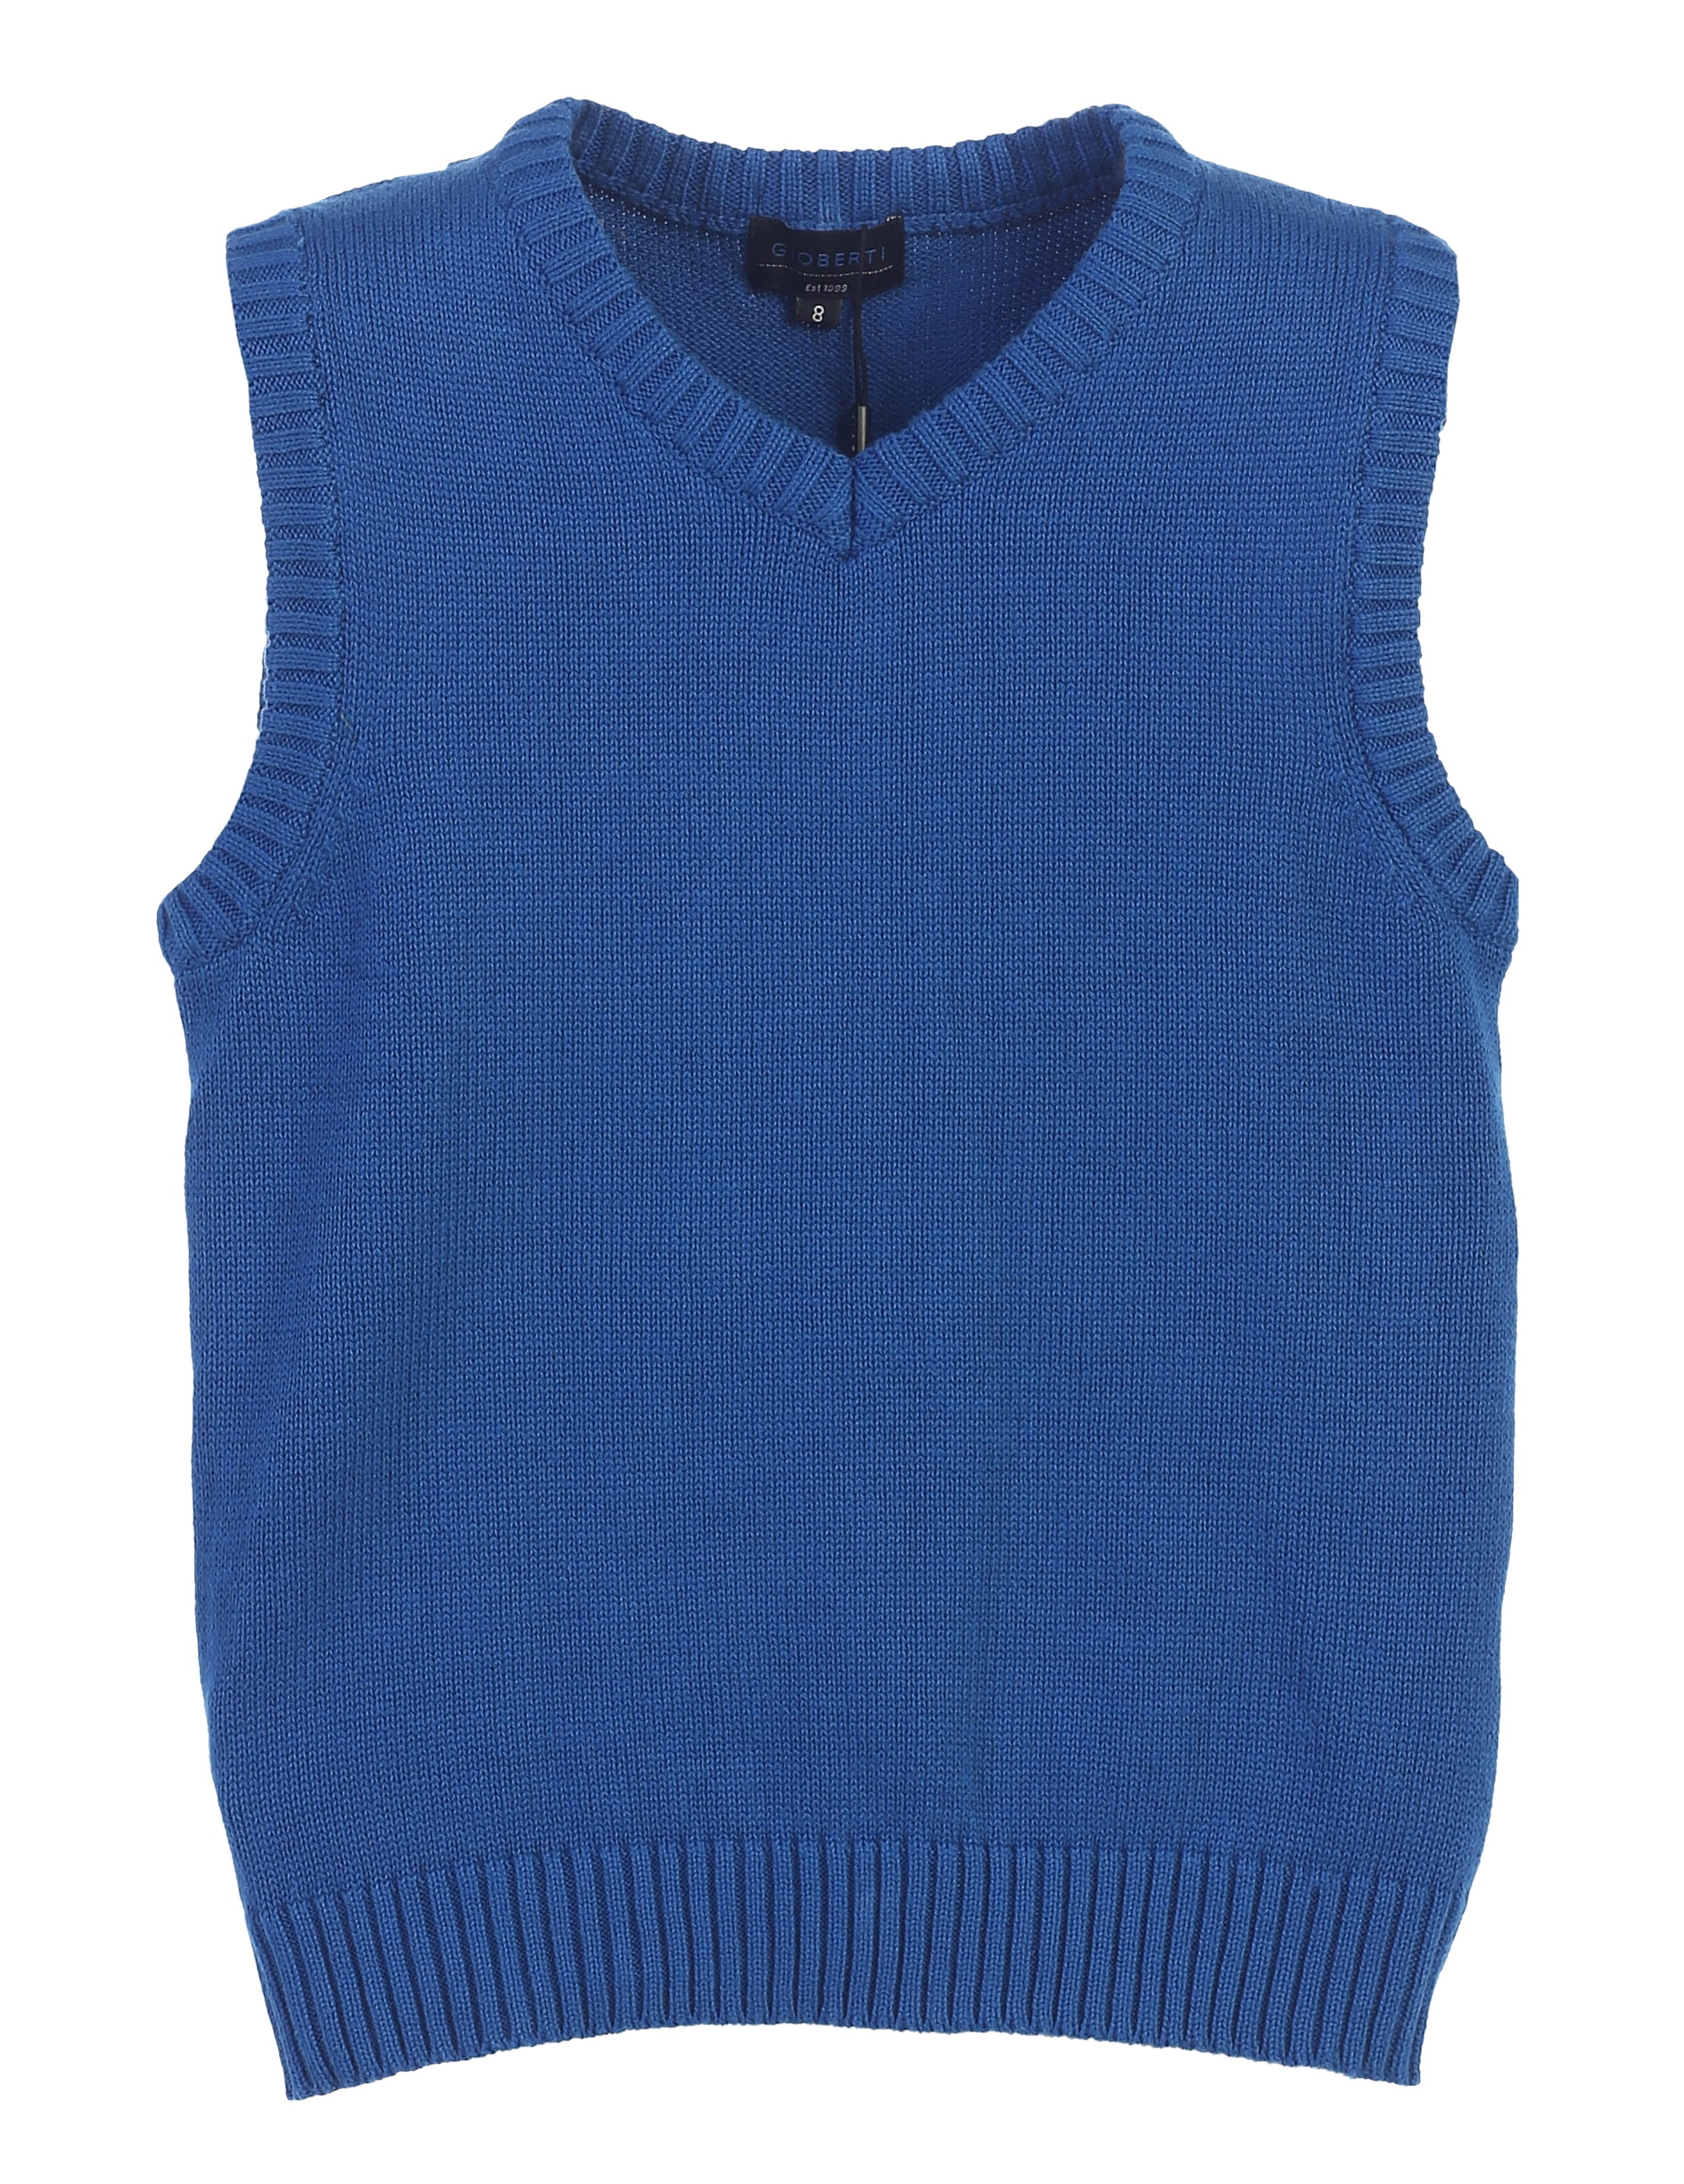 Gioberti Kids and Boys V-Neck 100% Cotton Knitted Pullover Sweater Vest ...